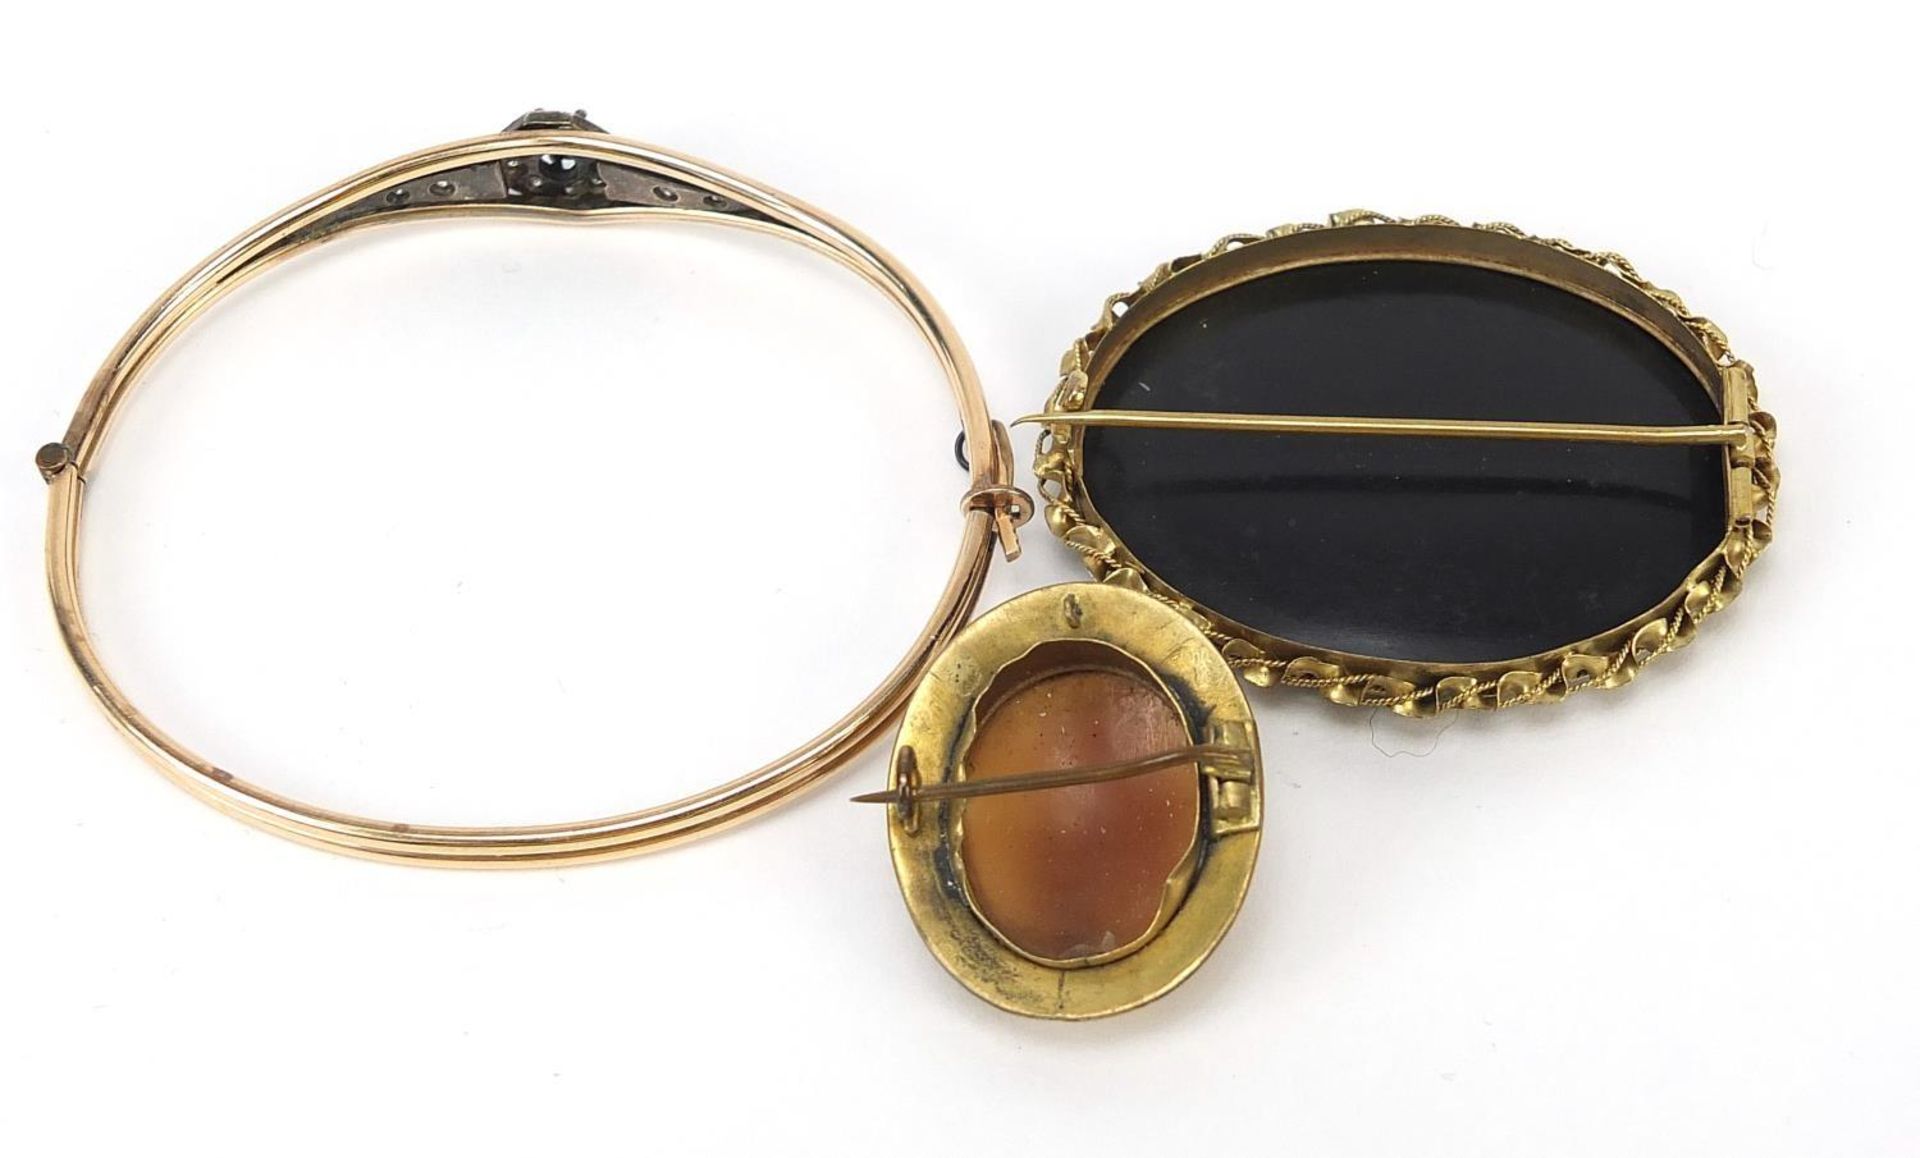 Antique jewellery comprising a pietra dura brooch, cameo brooch and a black and clear sapphire - Image 4 of 4